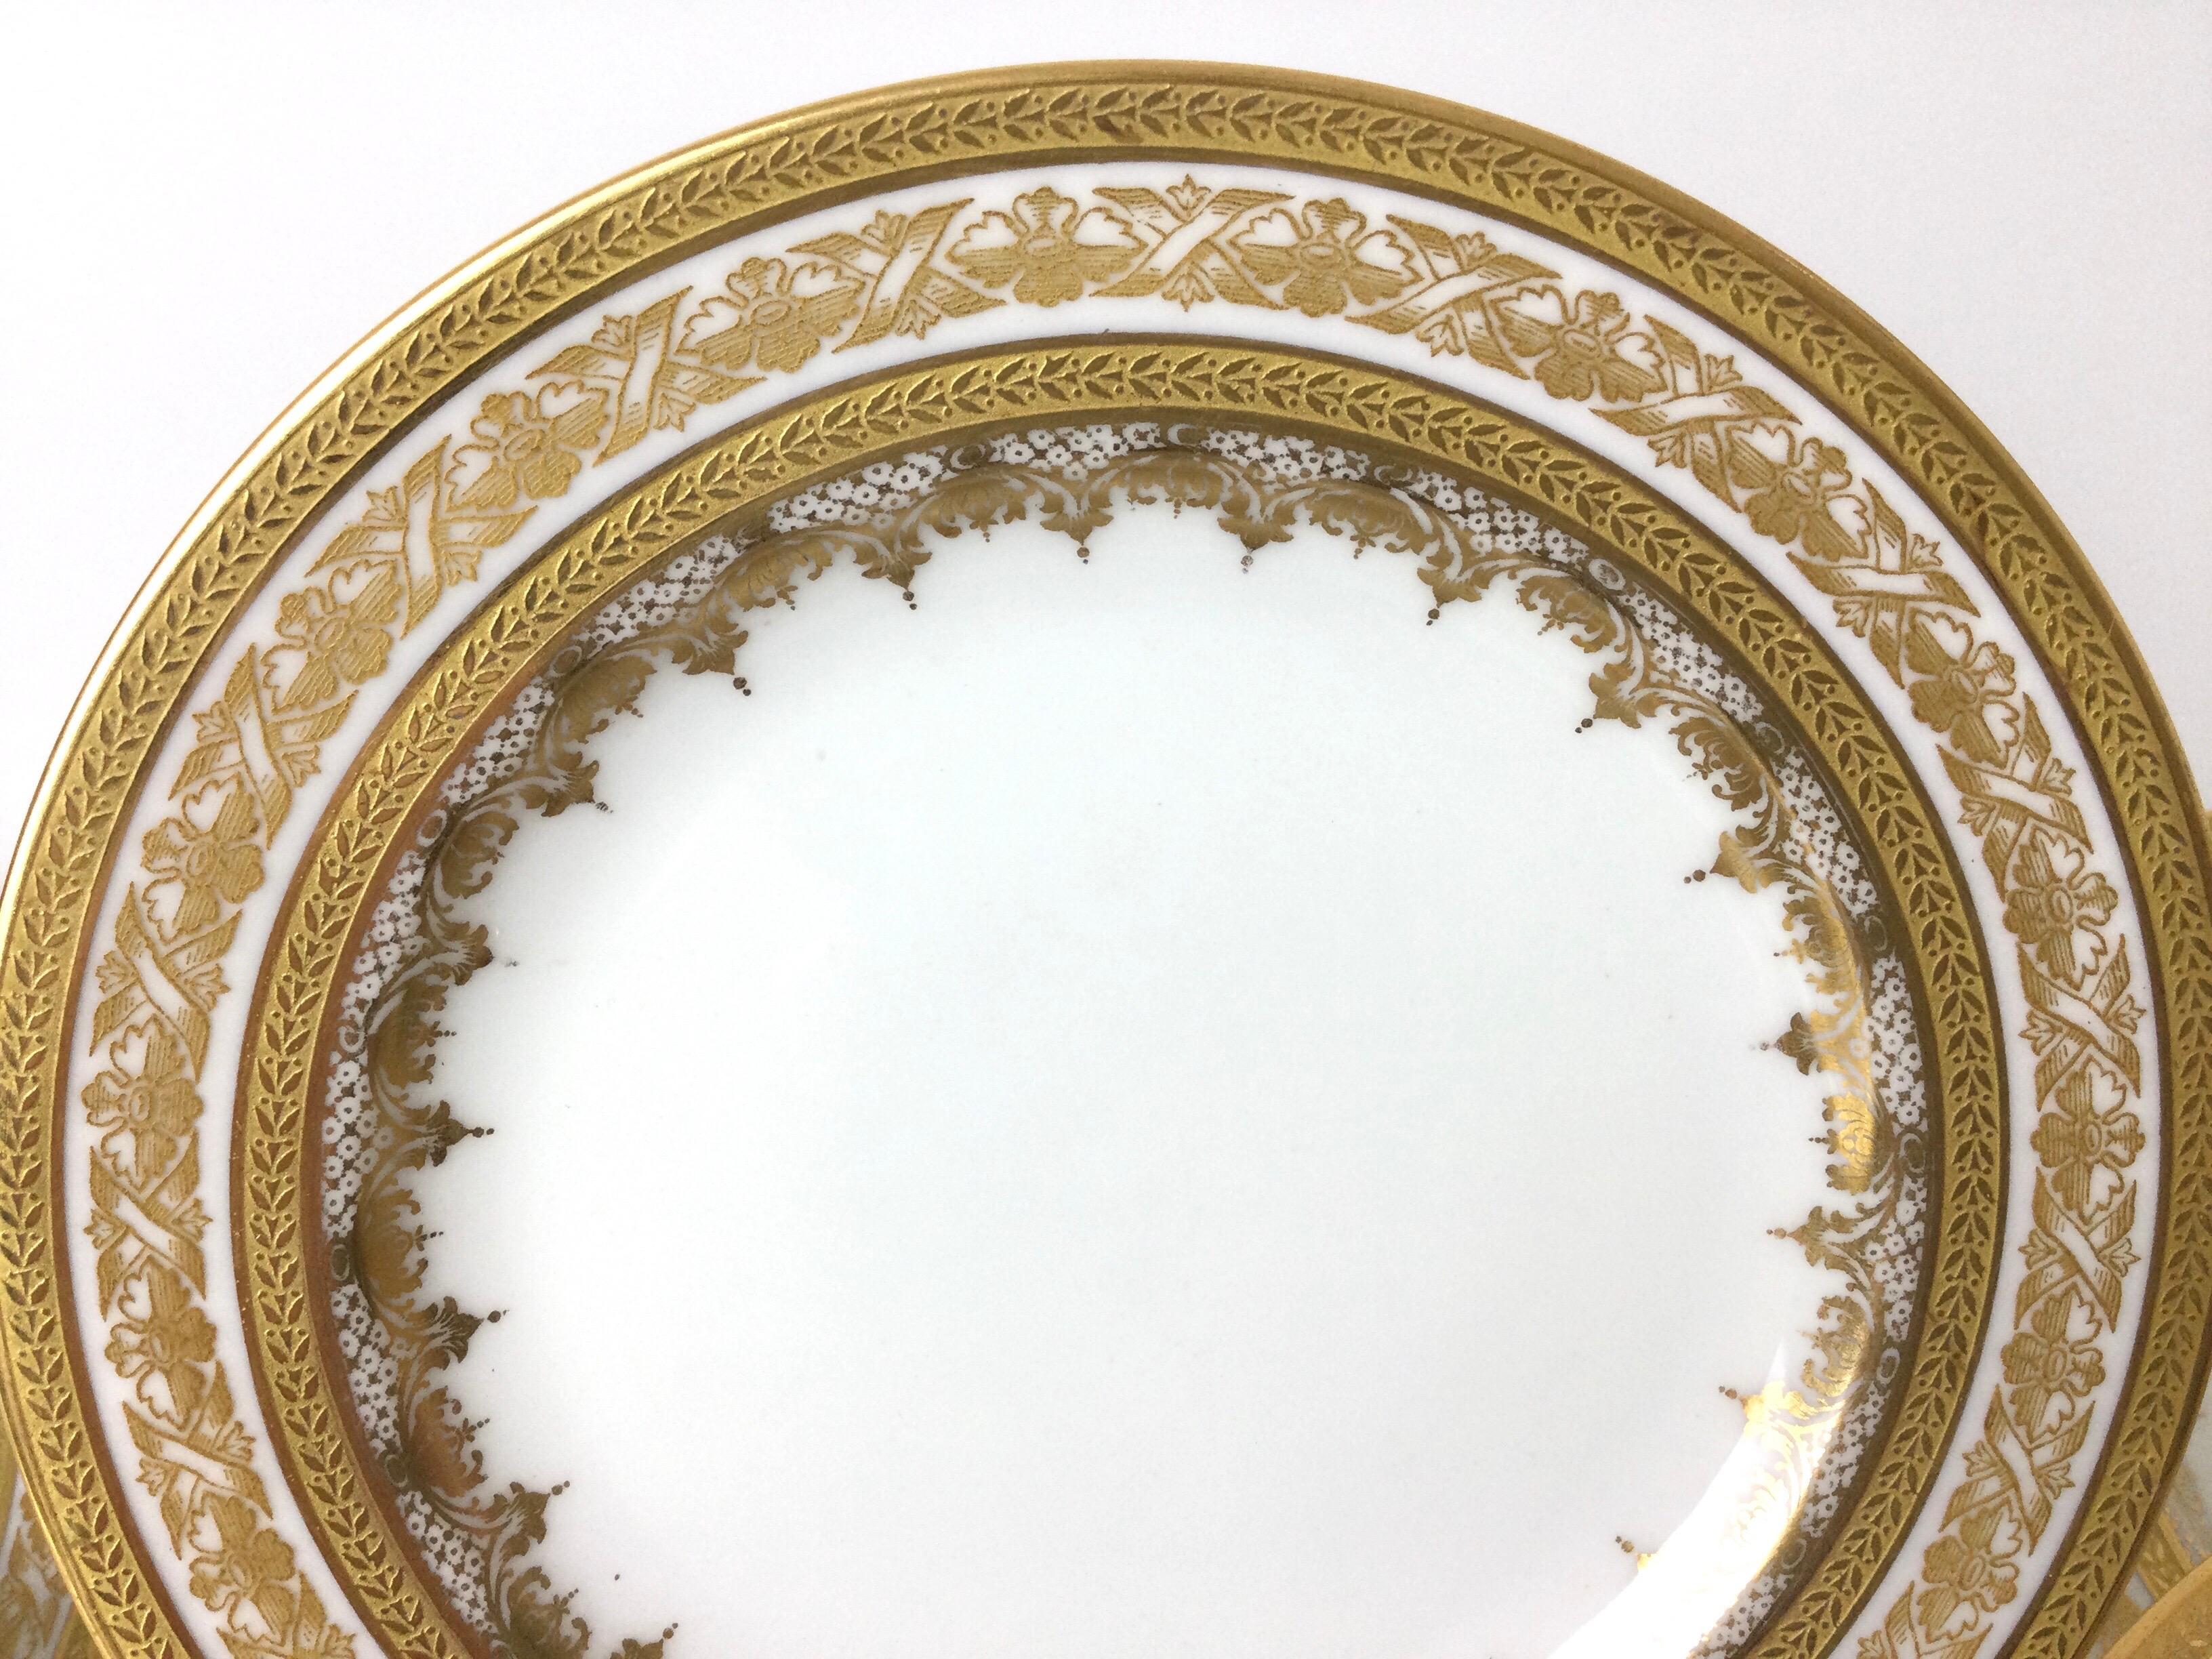 Set of 8 Limoges Gold Encrusted Bread and Butter Plates In Excellent Condition For Sale In Lambertville, NJ